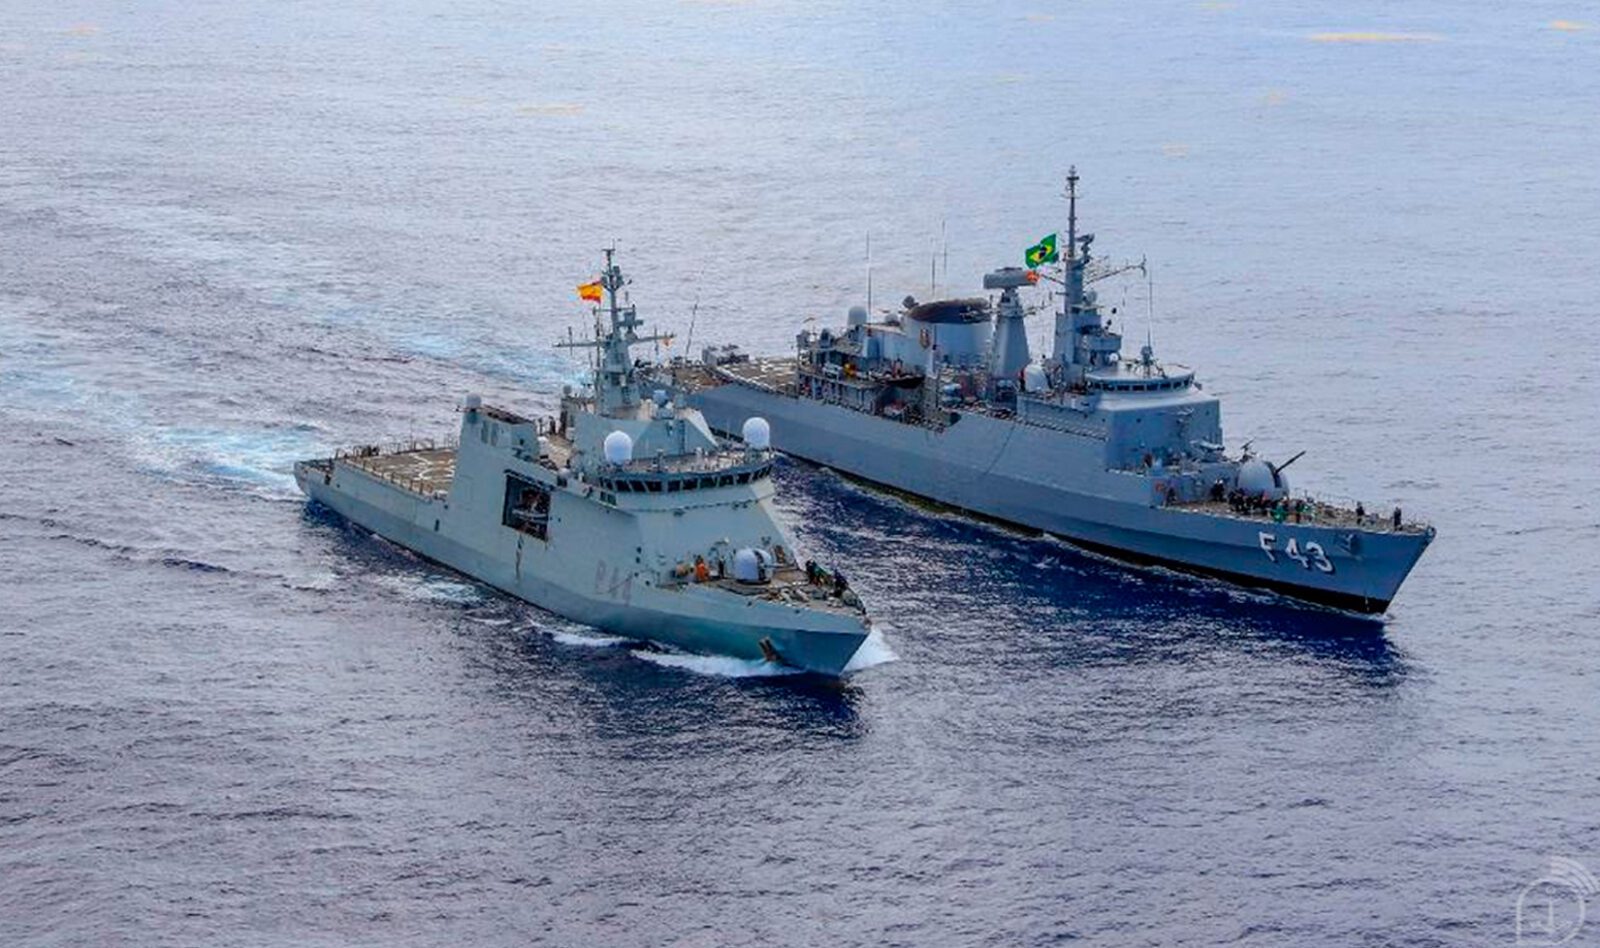 Frigate "Liberal" conducts exercises with the Spanish Navy in the Gulf of Guinea